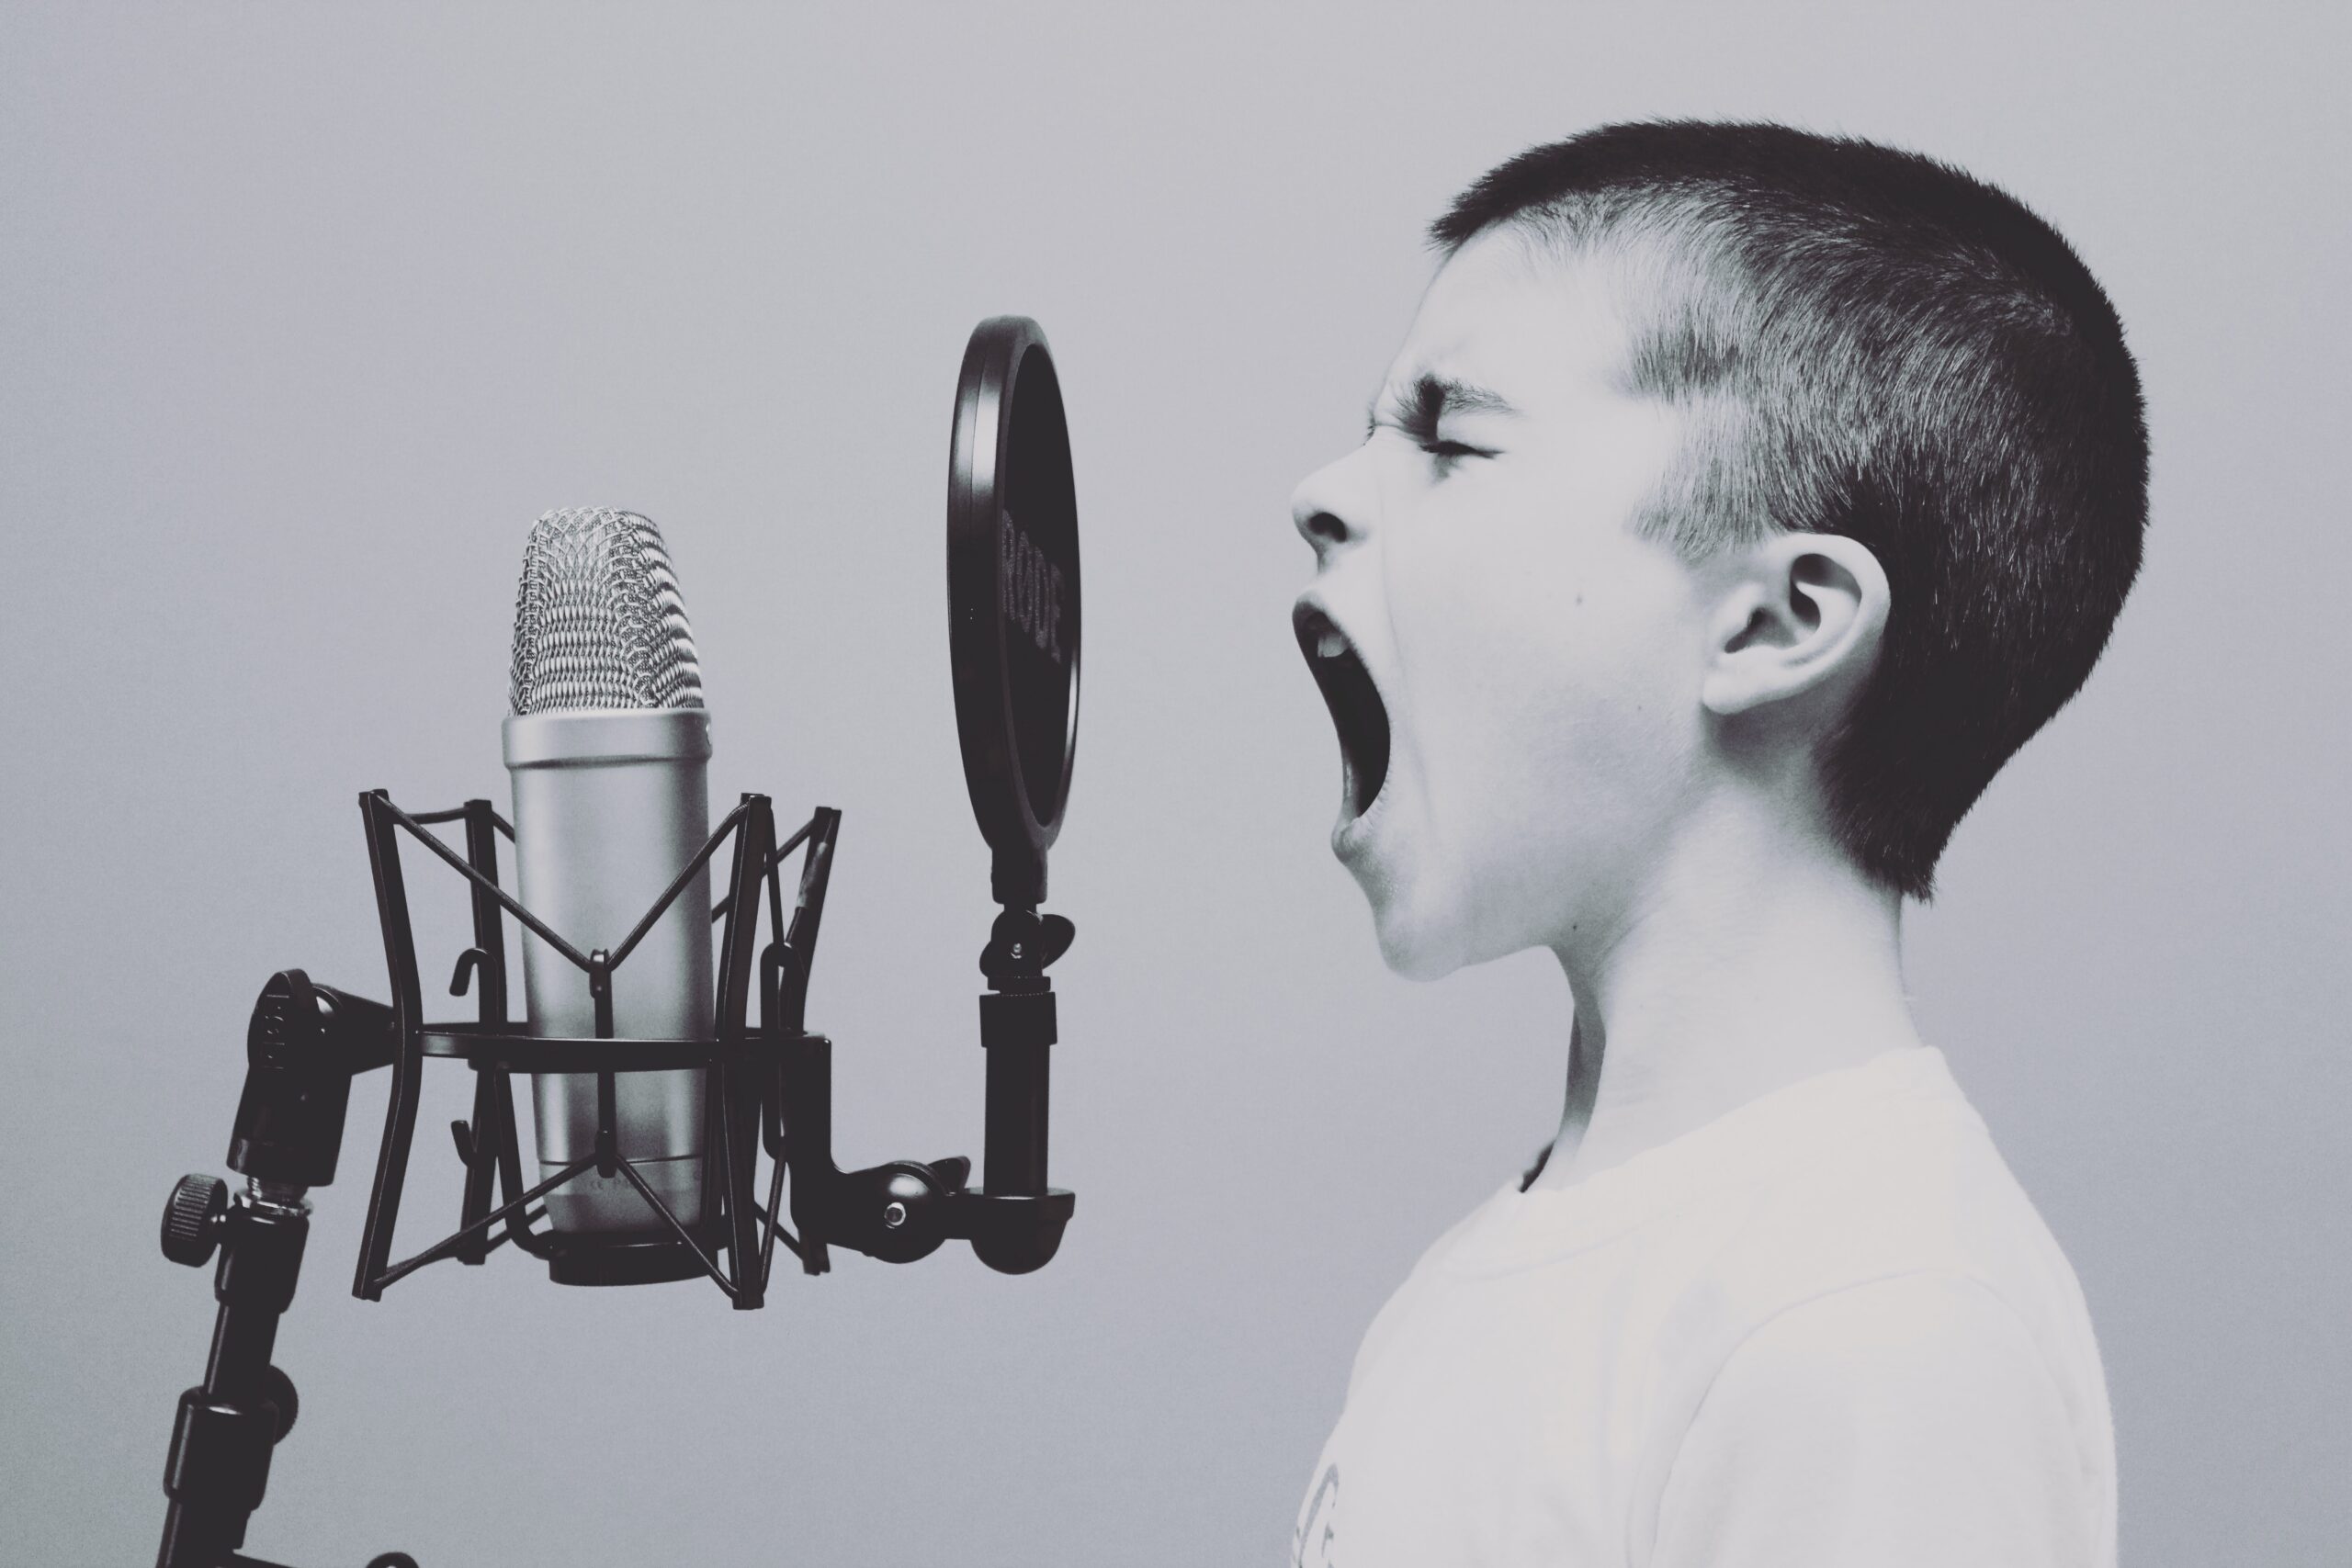 A child singing into a microphone